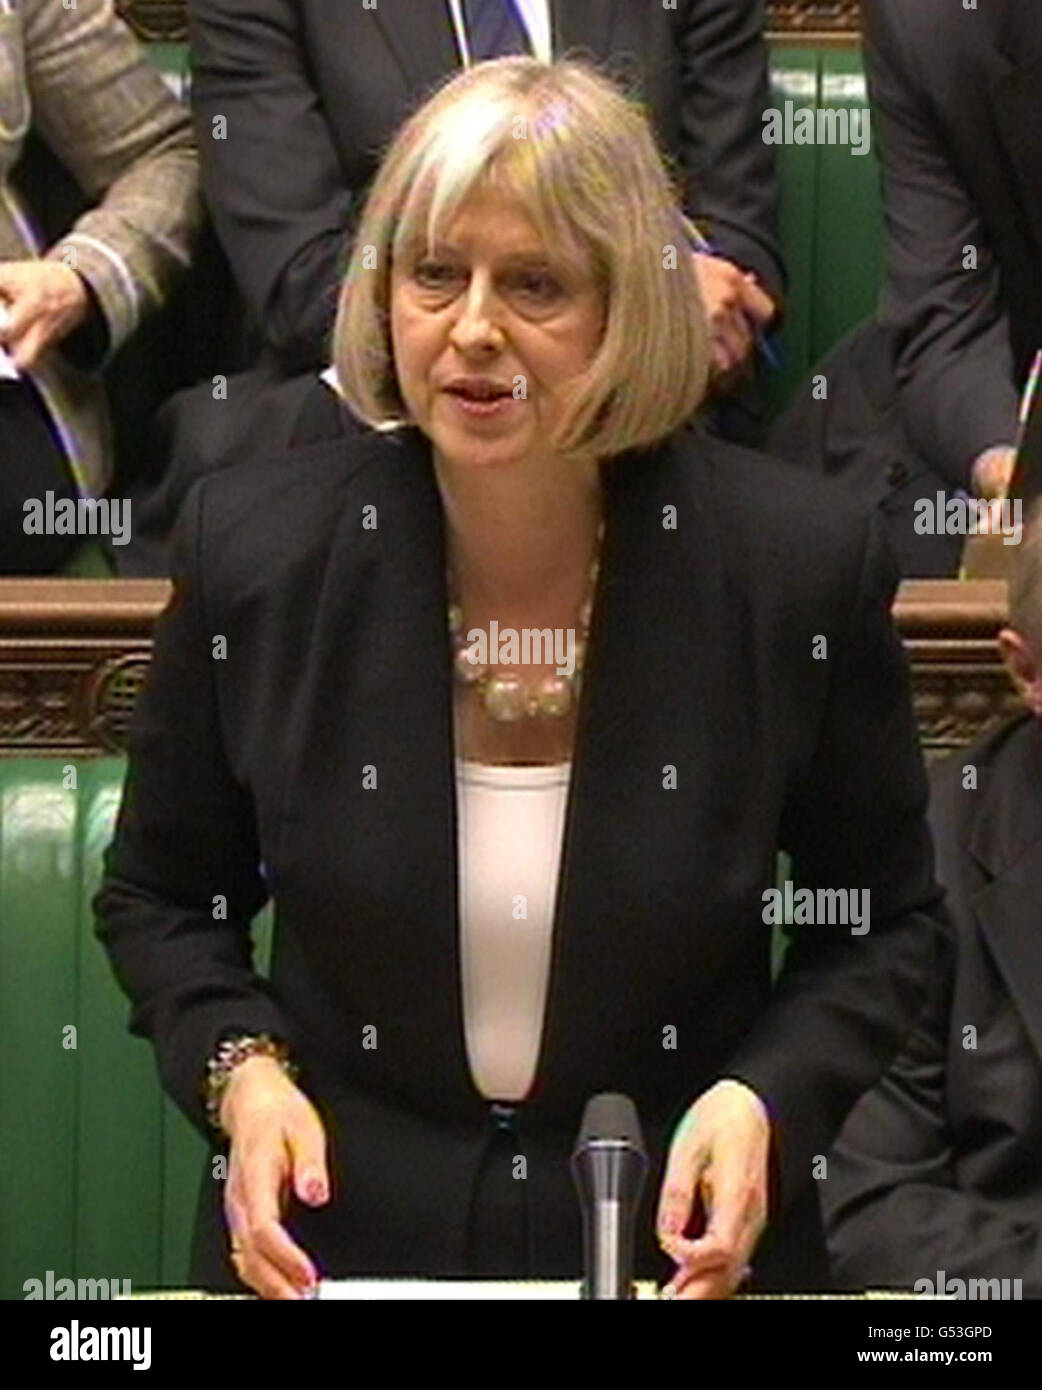 Home Secretary Theresa May explains to MPs in the House of Commons, the latest delay in the decade-long effort to deport terror suspect Abu Qatada. Stock Photo